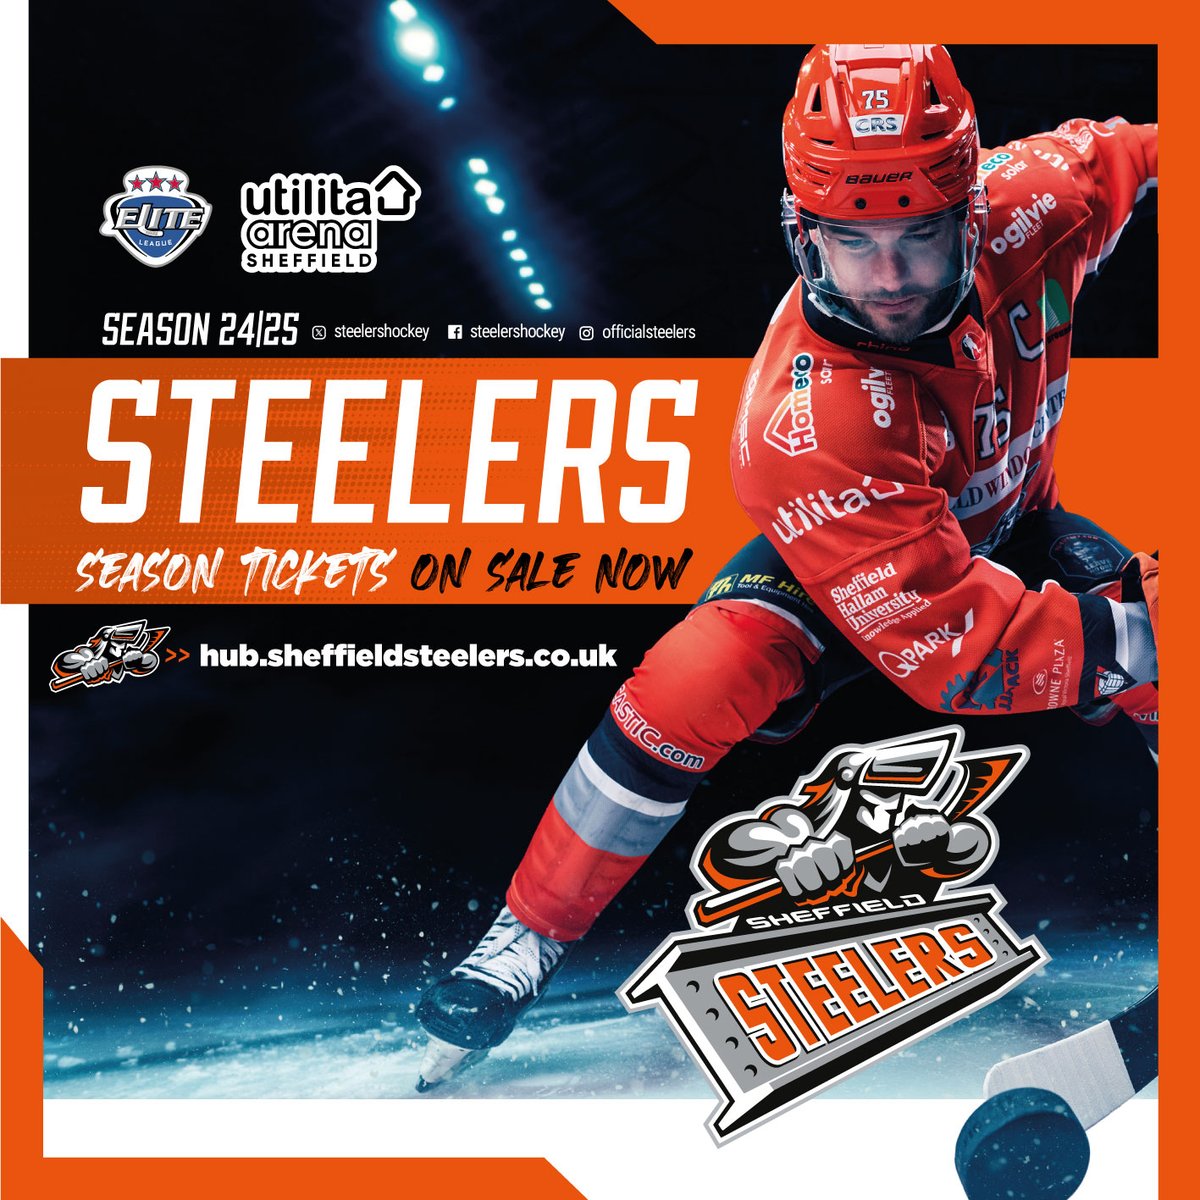 🍊🏒 A reminder, all existing Season Ticket holders only have until Tuesday 30th April to reserve their season ticket seats. Information on ST can be found HERE: sheffieldsteelers.co.uk/season-tickets… Buy your existing or new ST on the hub HERE: hub.sheffieldsteelers.co.uk #SteelersHockey